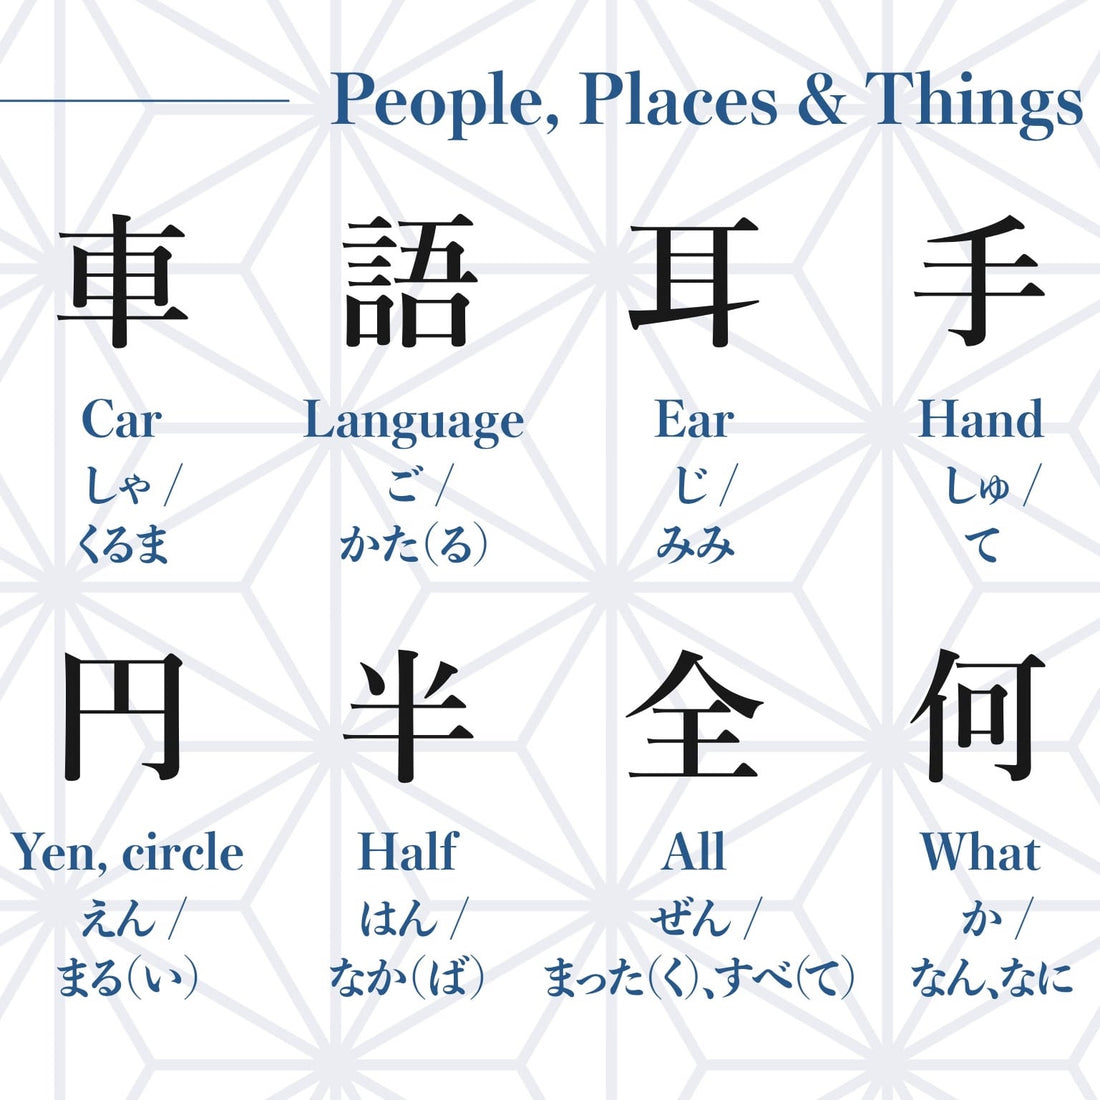 JLPT N5 Kanji List - All 112 Characters You Need To Know